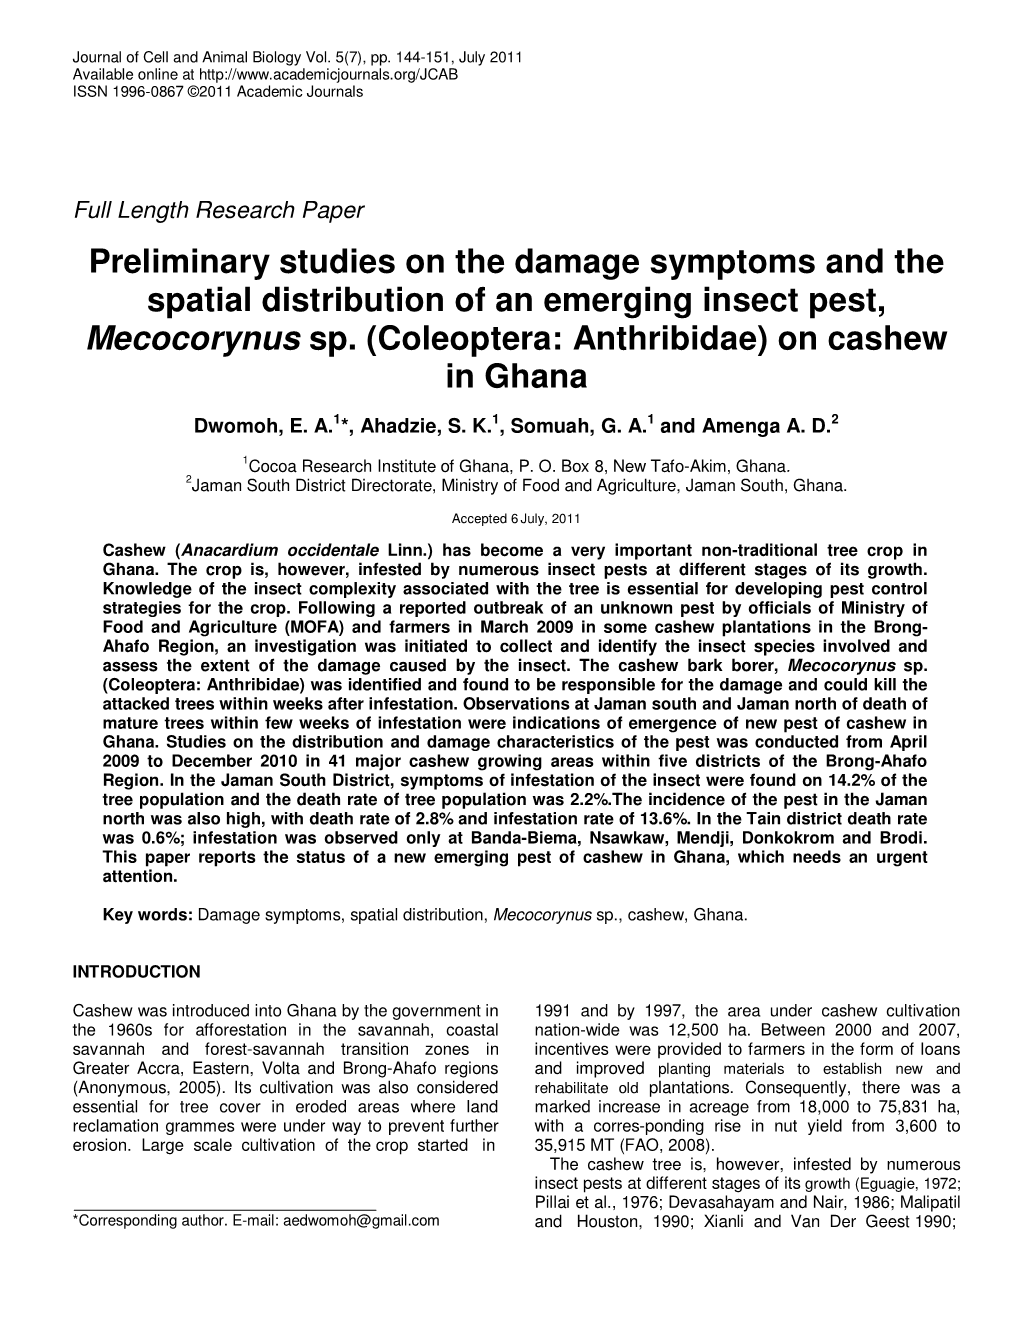 Preliminary Studies on the Damage Symptoms and the Spatial Distribution of an Emerging Insect Pest, Mecocorynus Sp